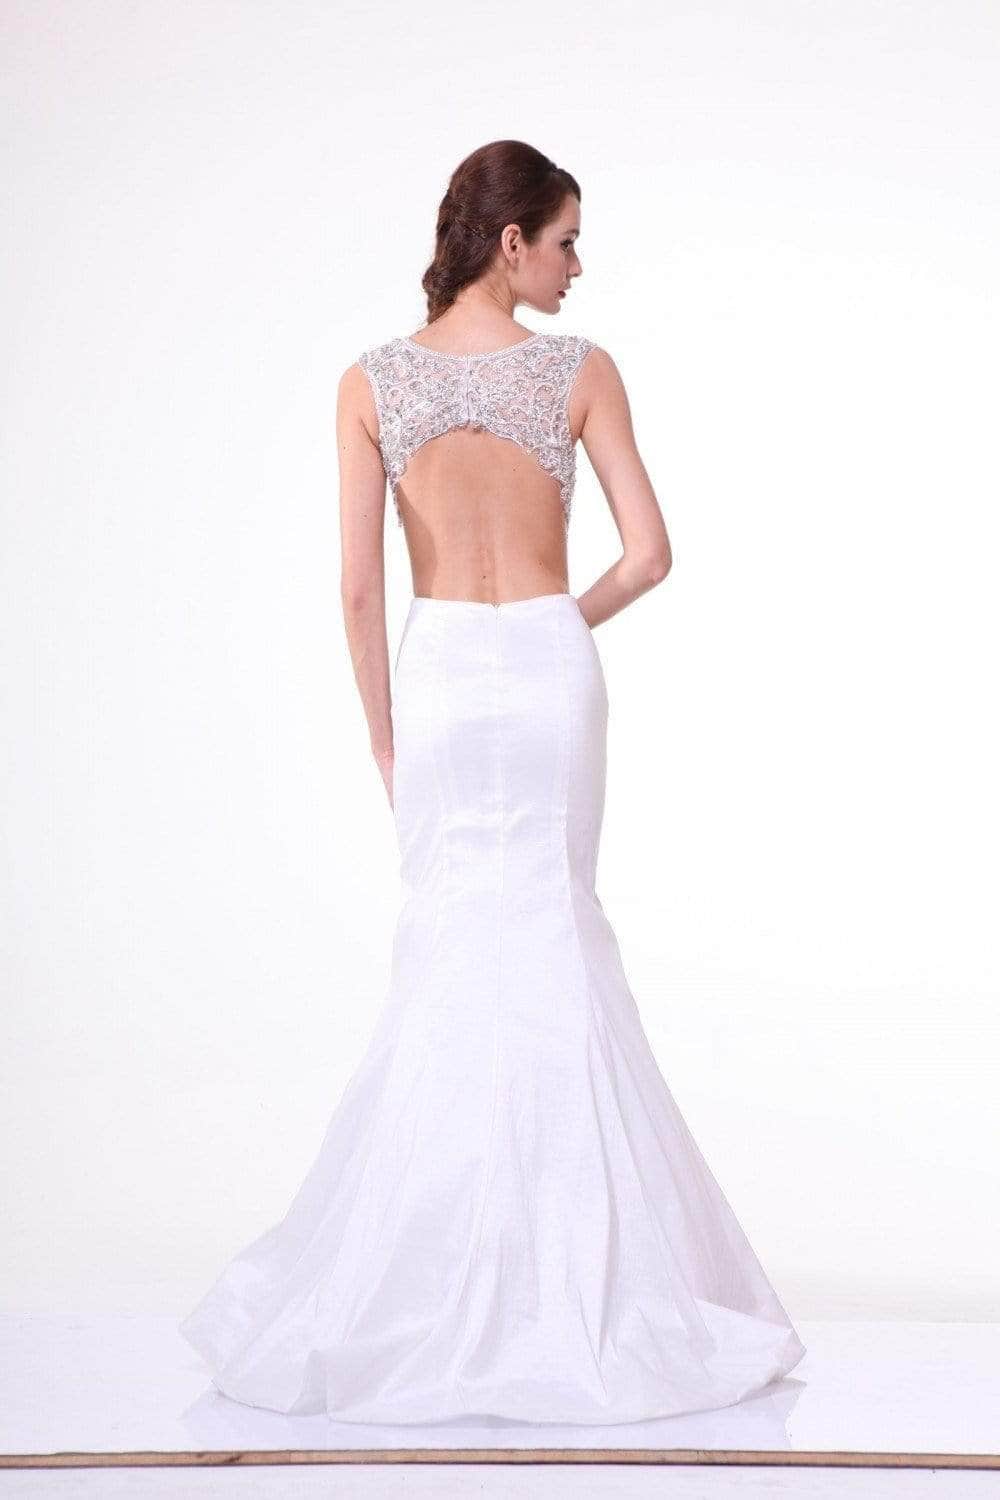 Ladivine, Ladivine 8788 - Plunging Illusion Notched Embellished Long Gown